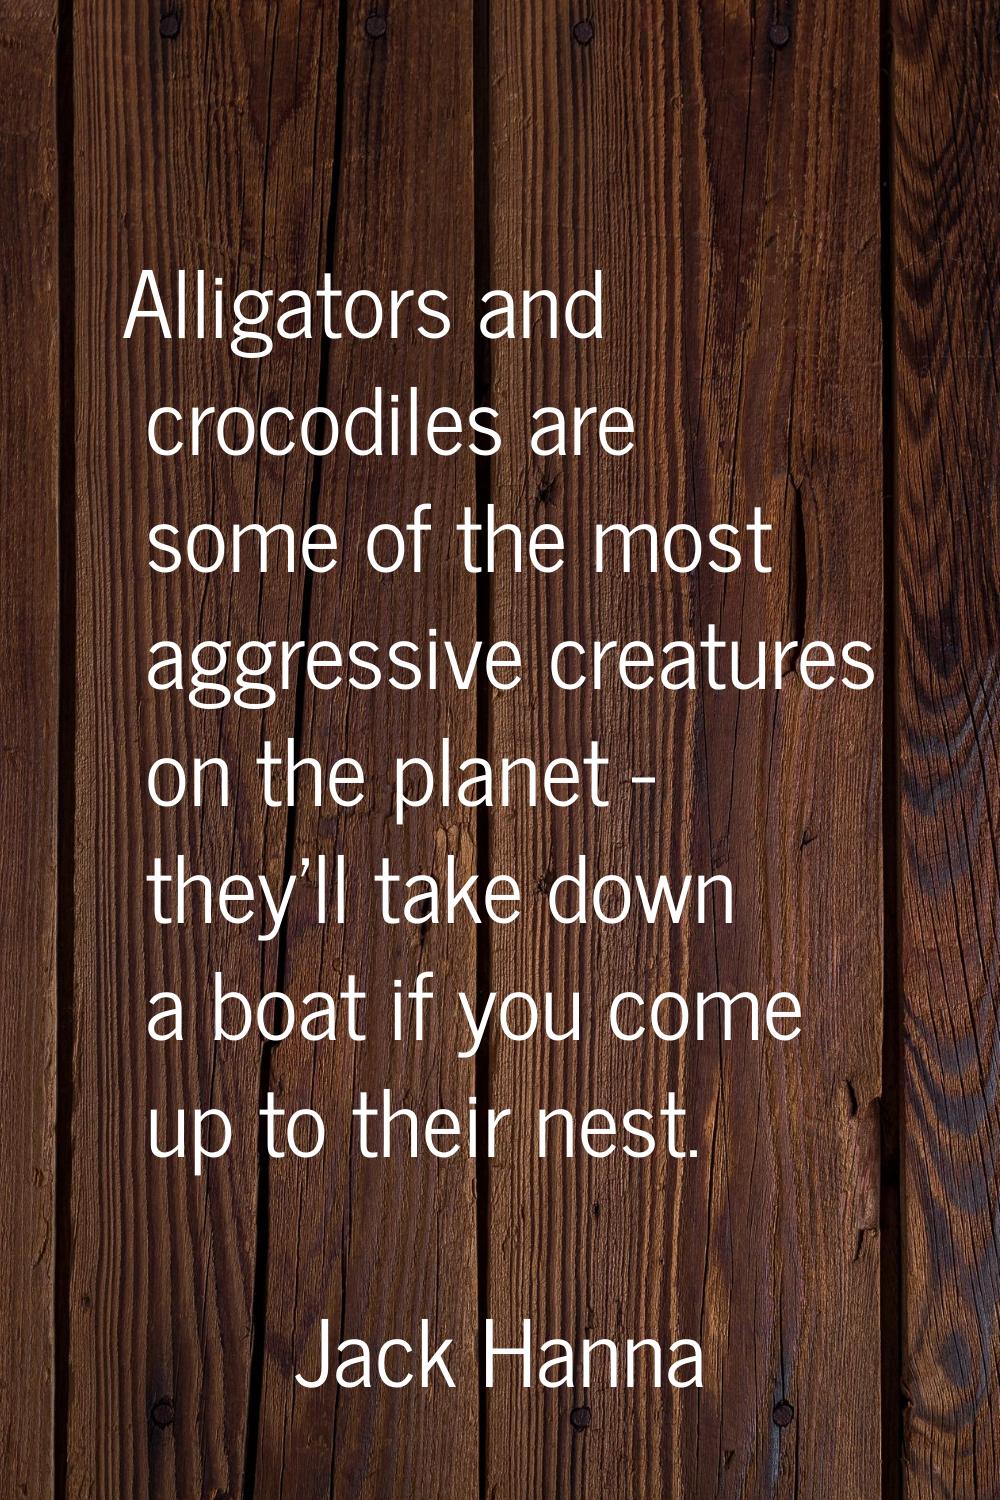 Alligators and crocodiles are some of the most aggressive creatures on the planet - they'll take do